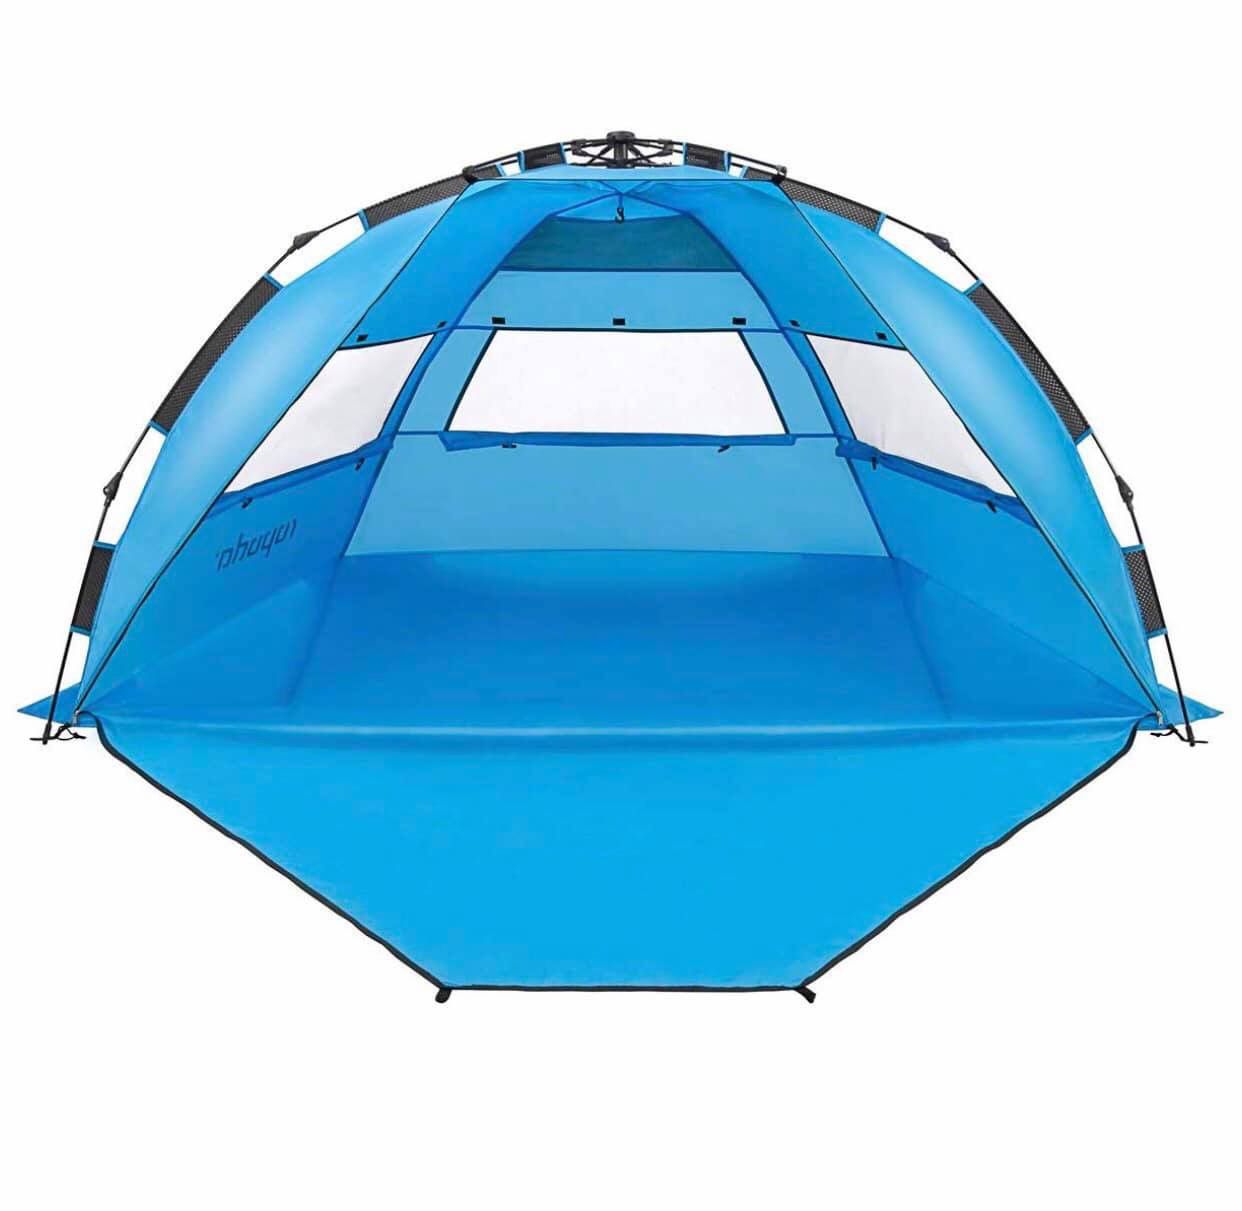 Brand New Pop Up Beach Tent - Easy to Set Up, Portable Beach Shade with UPF 50+ UV Protection for Kids & Family POP UP BEACH TENT - Raise in seconds